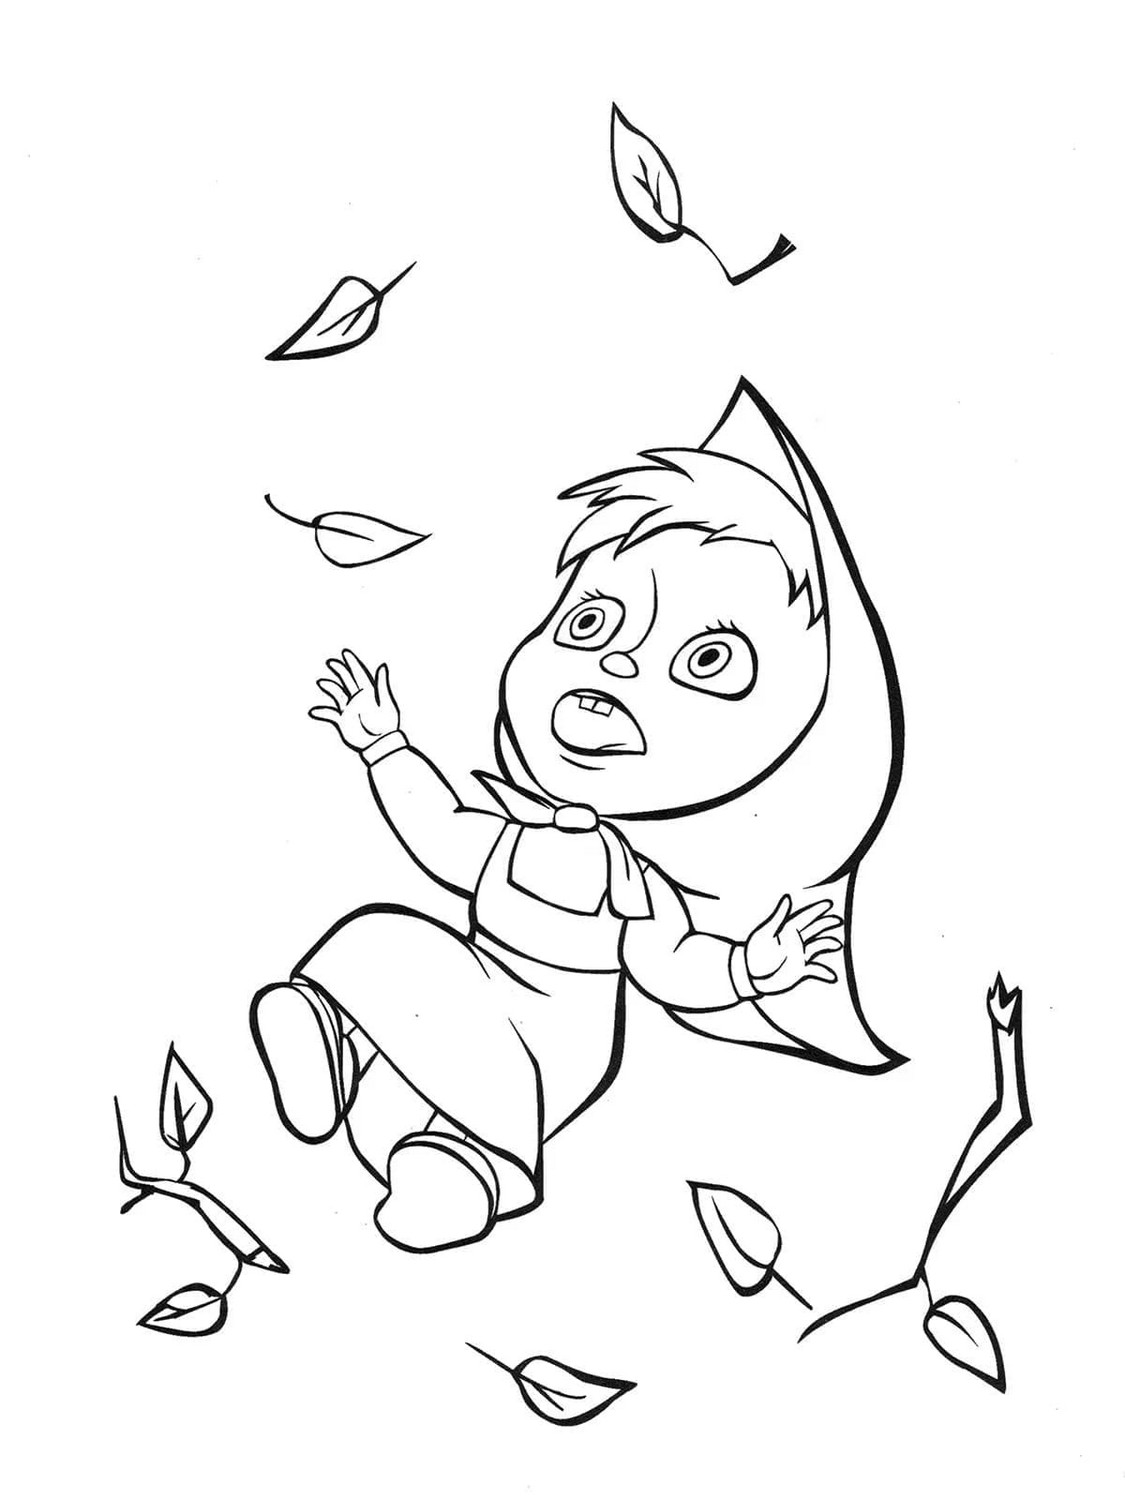 Masha and the Bear 91  coloring page to print and coloring